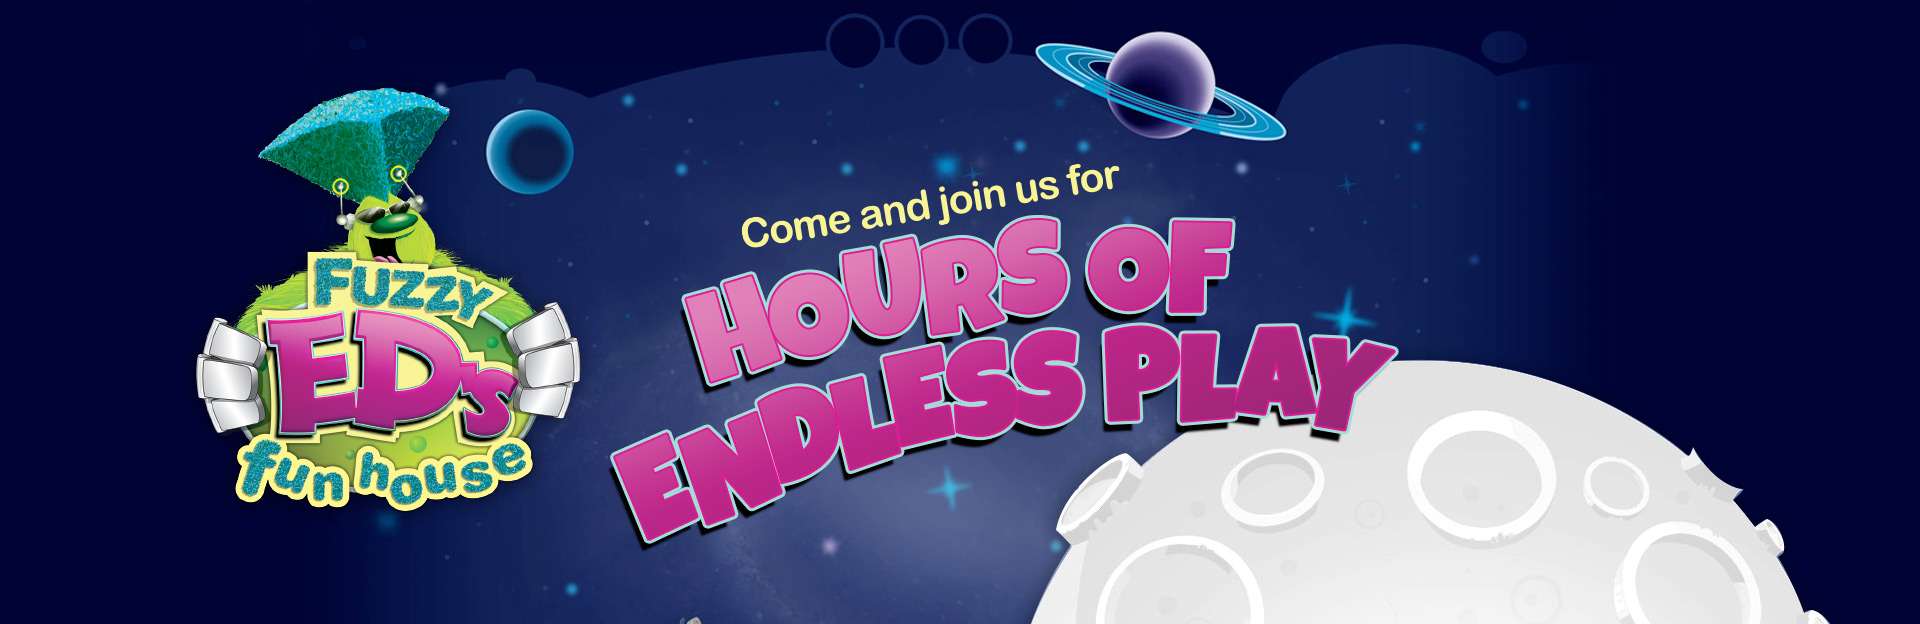 Join us for hours of endless play